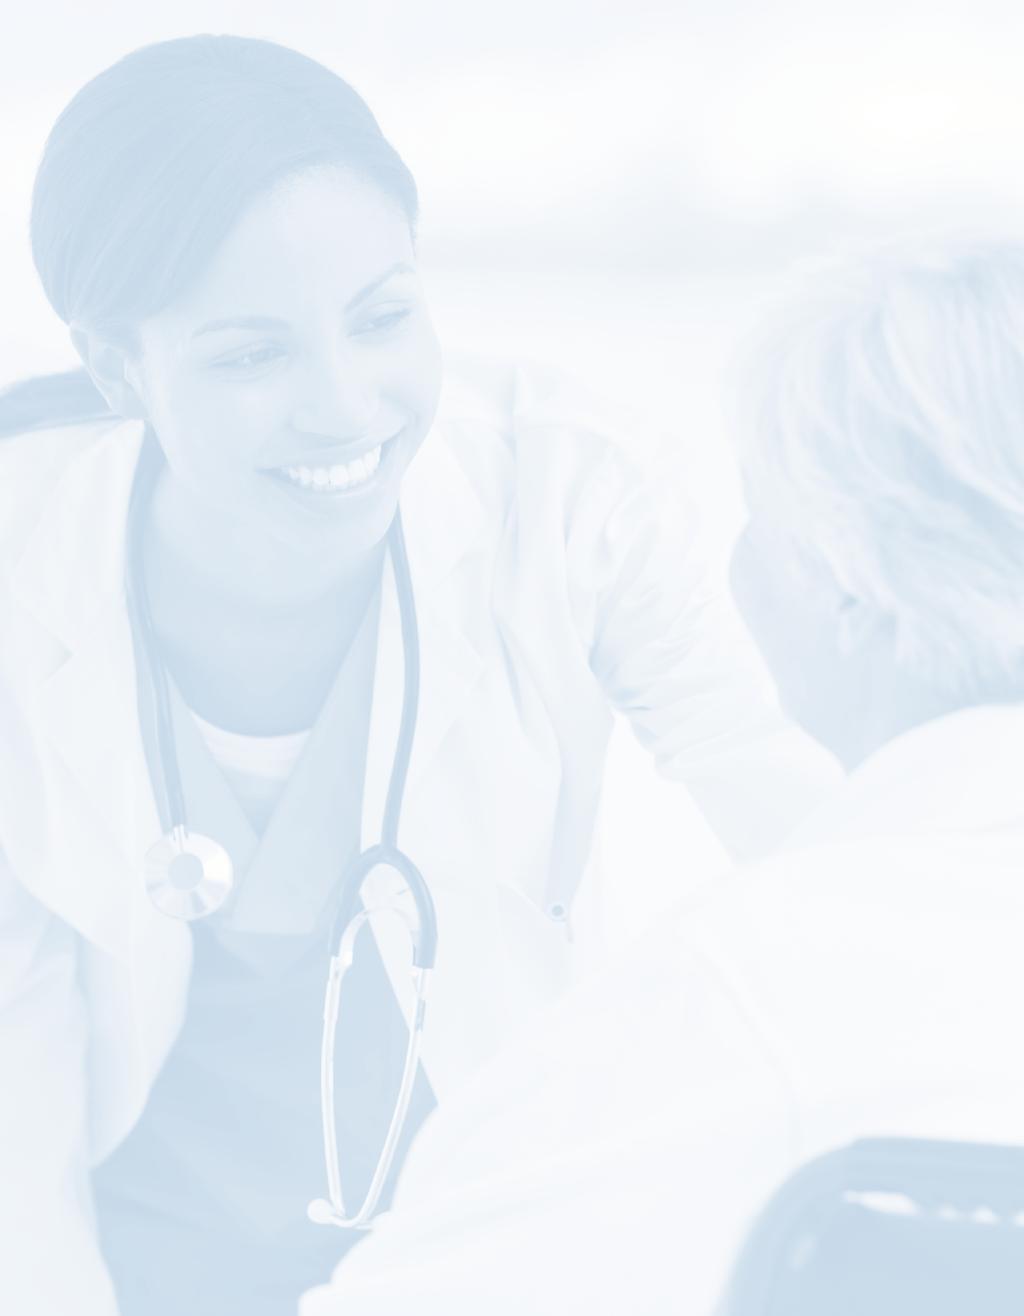 Introduction This white paper examines how new technologies are creating a fully connected point of care ecosystem in outpatient facilities that promises to enhance the interaction between patients